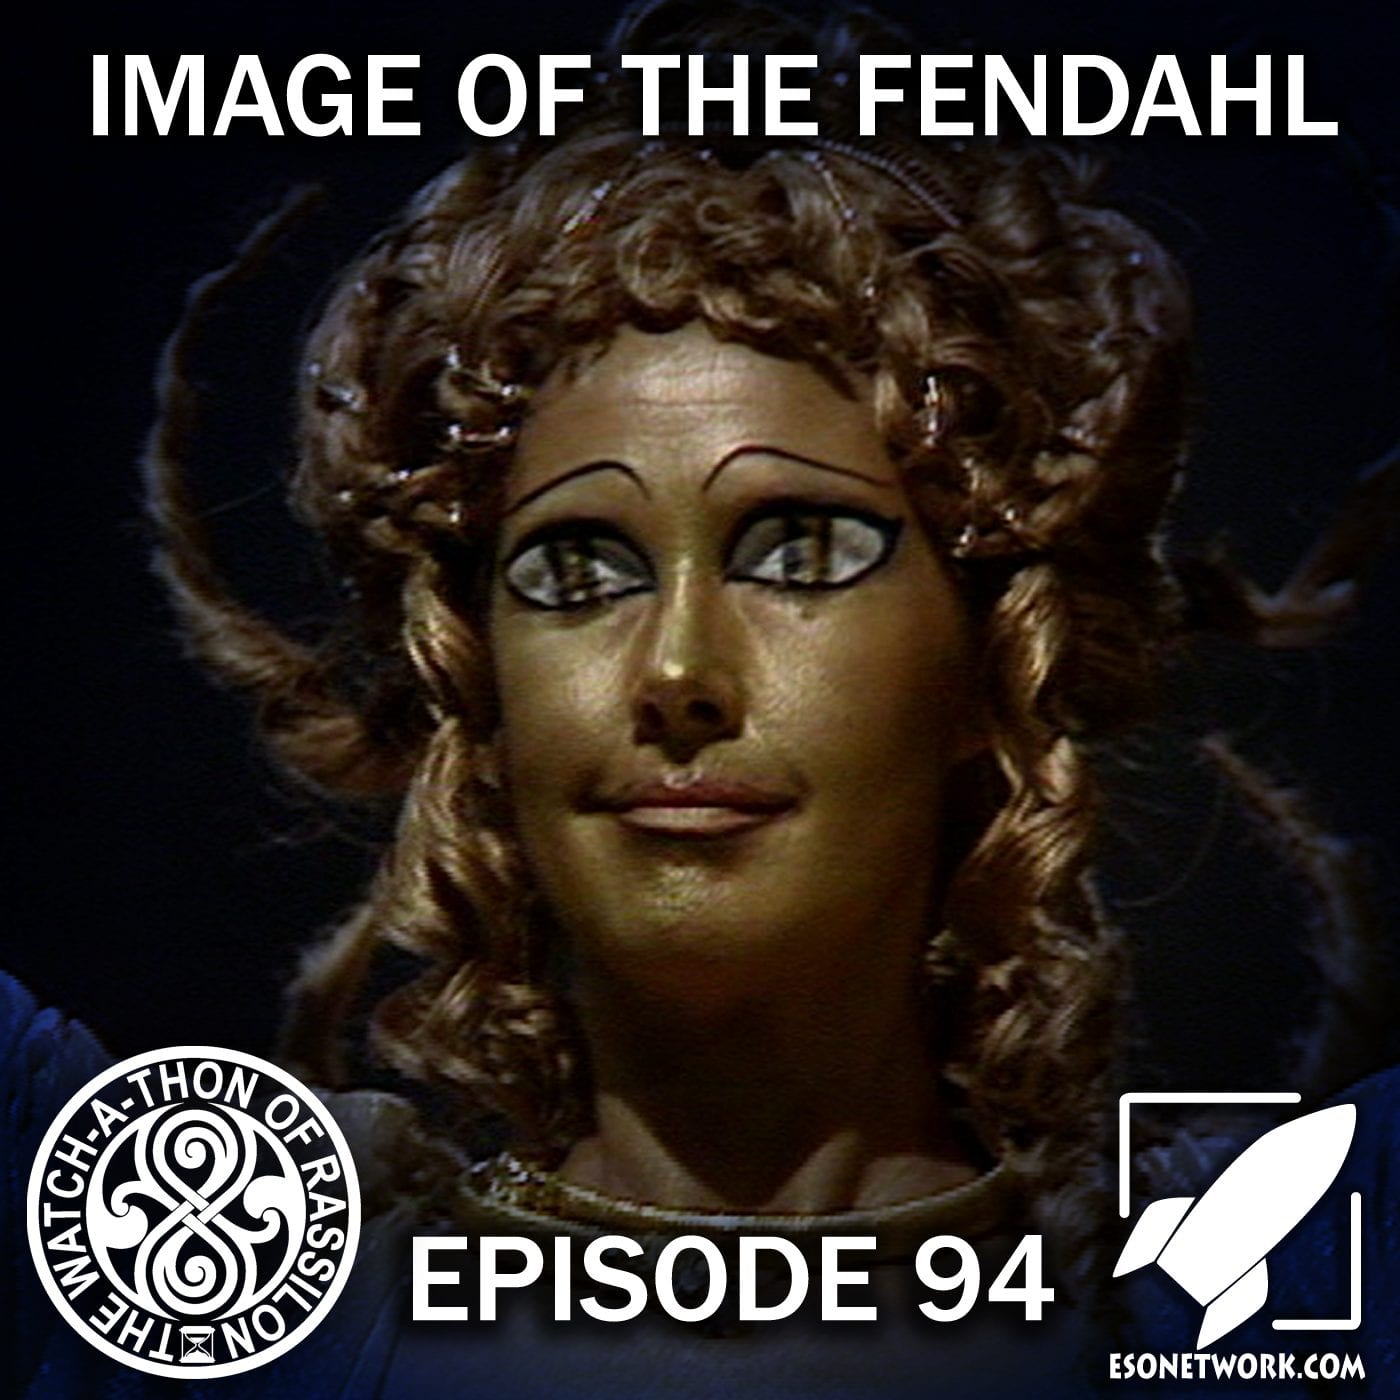 The Watch-A-Thon of Rassilon: Episode 94: Image of the Fendahl